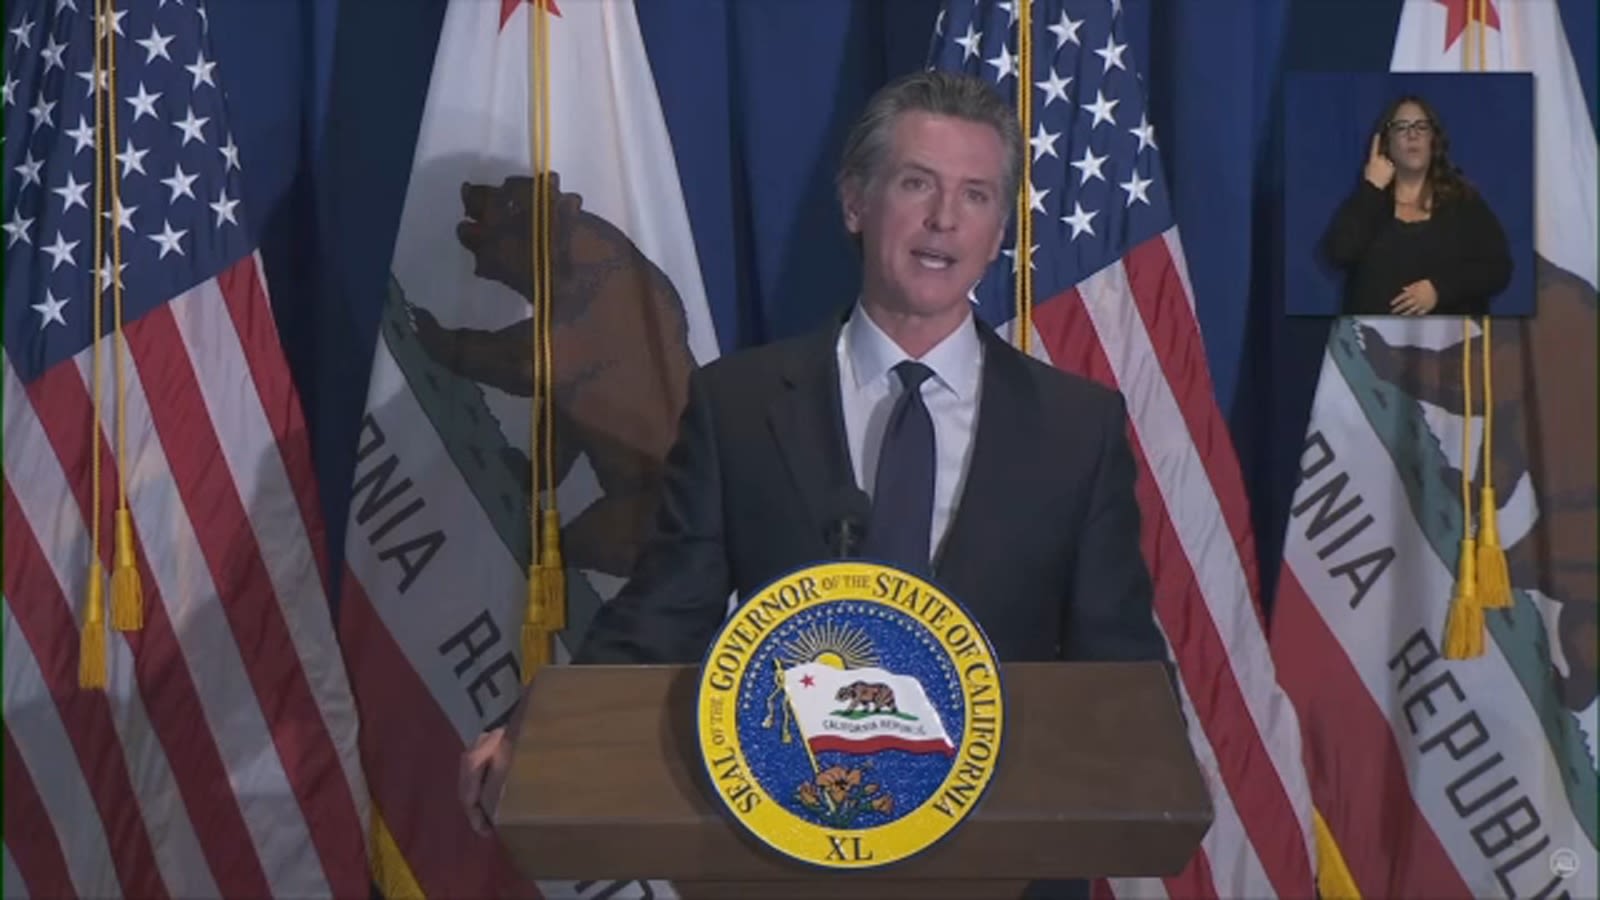 Newsom to update his budget proposal Friday as California's deficit is likely growing